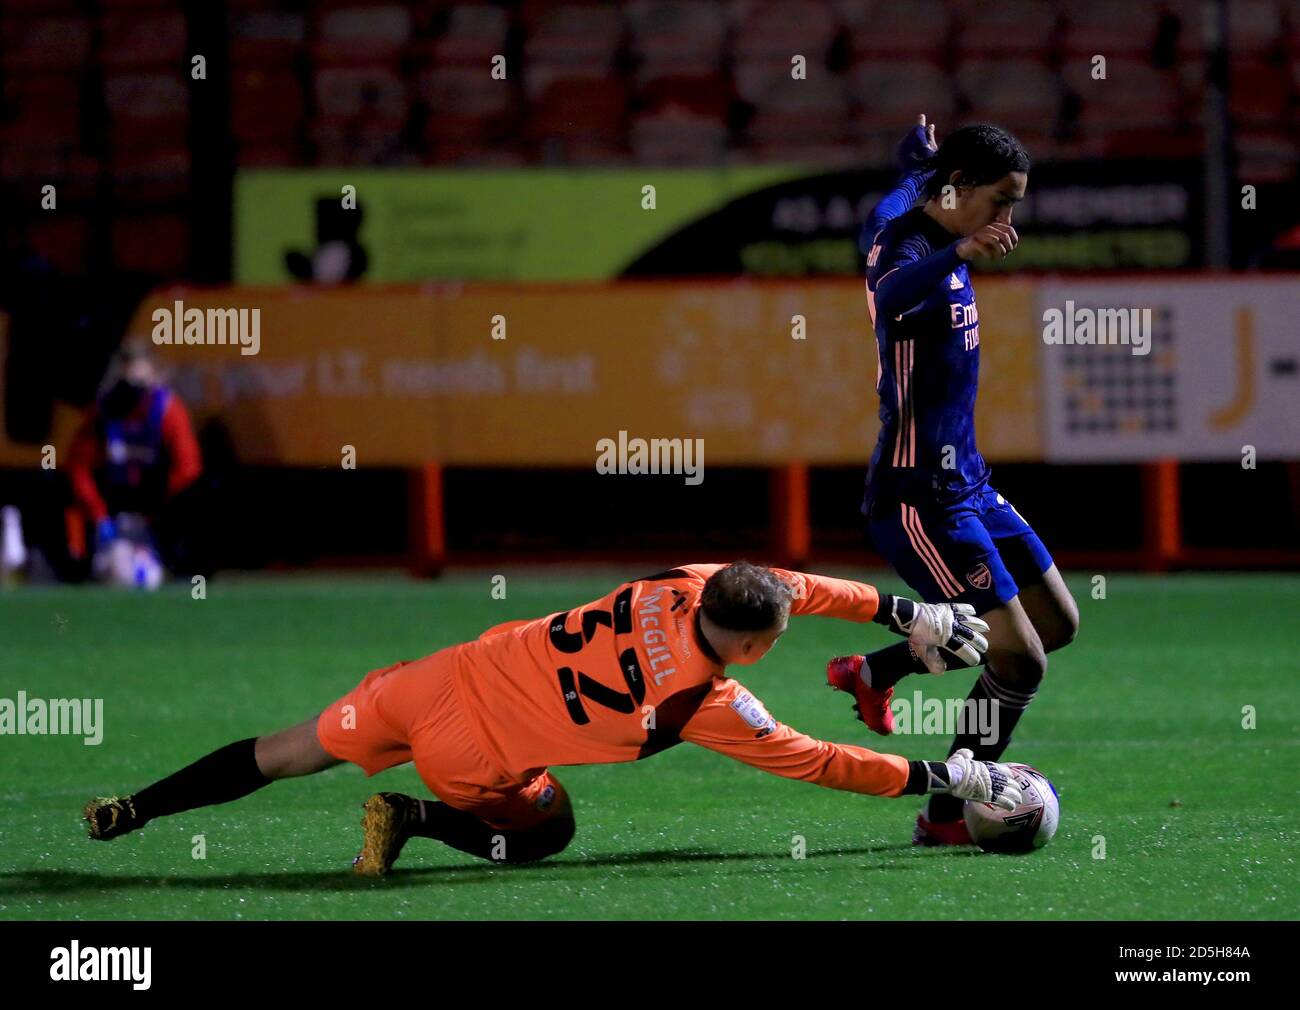 lindre økse Afvise Arsenal U21's Kido Taylor-Hart (right) gets the ball past Crawley Town  goalkeeper Thomas McGill to assist teammate Jordan McEneff (not pictured)  in scoring their sides first goal of the game during the